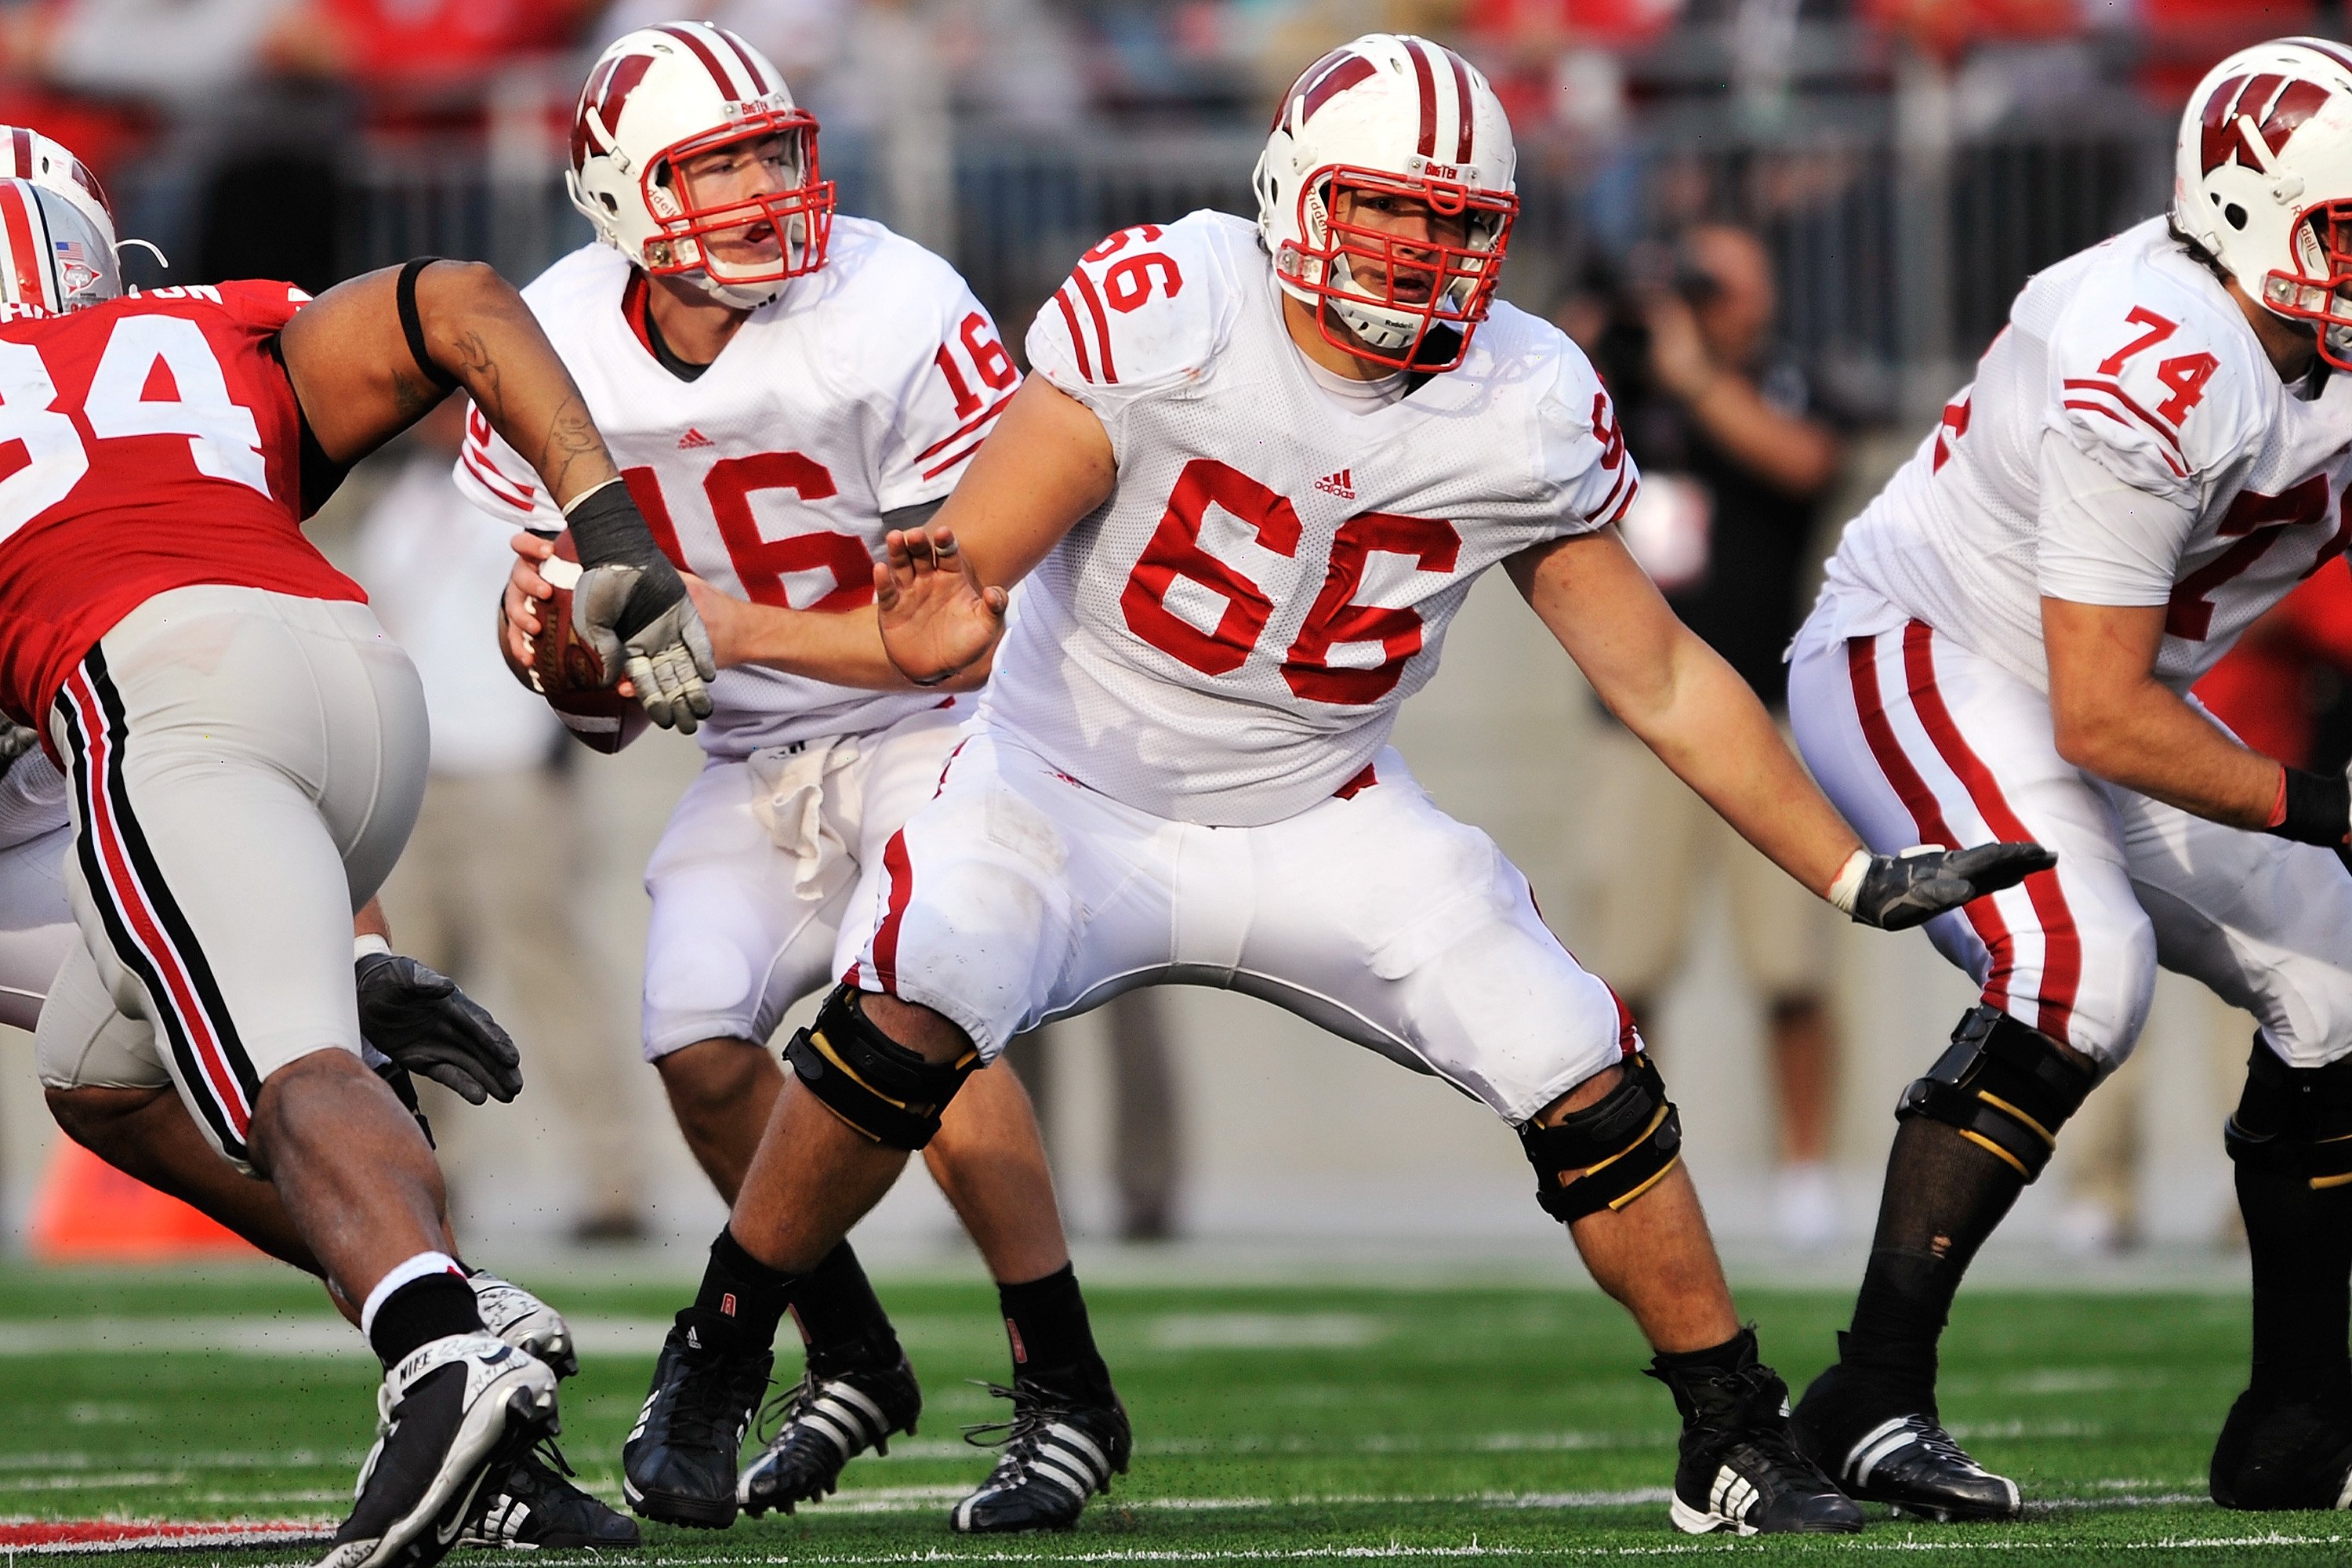 COLUMBUS, OH - OCTOBER 10:  Offensive lineman Peter Konz #66 of the Wisconsin Badgers blocks against the Ohio State Buckeyes at Ohio Stadium on October 10, 2009 in Columbus, Ohio.  (Photo by Jamie Sabau/Getty Images)